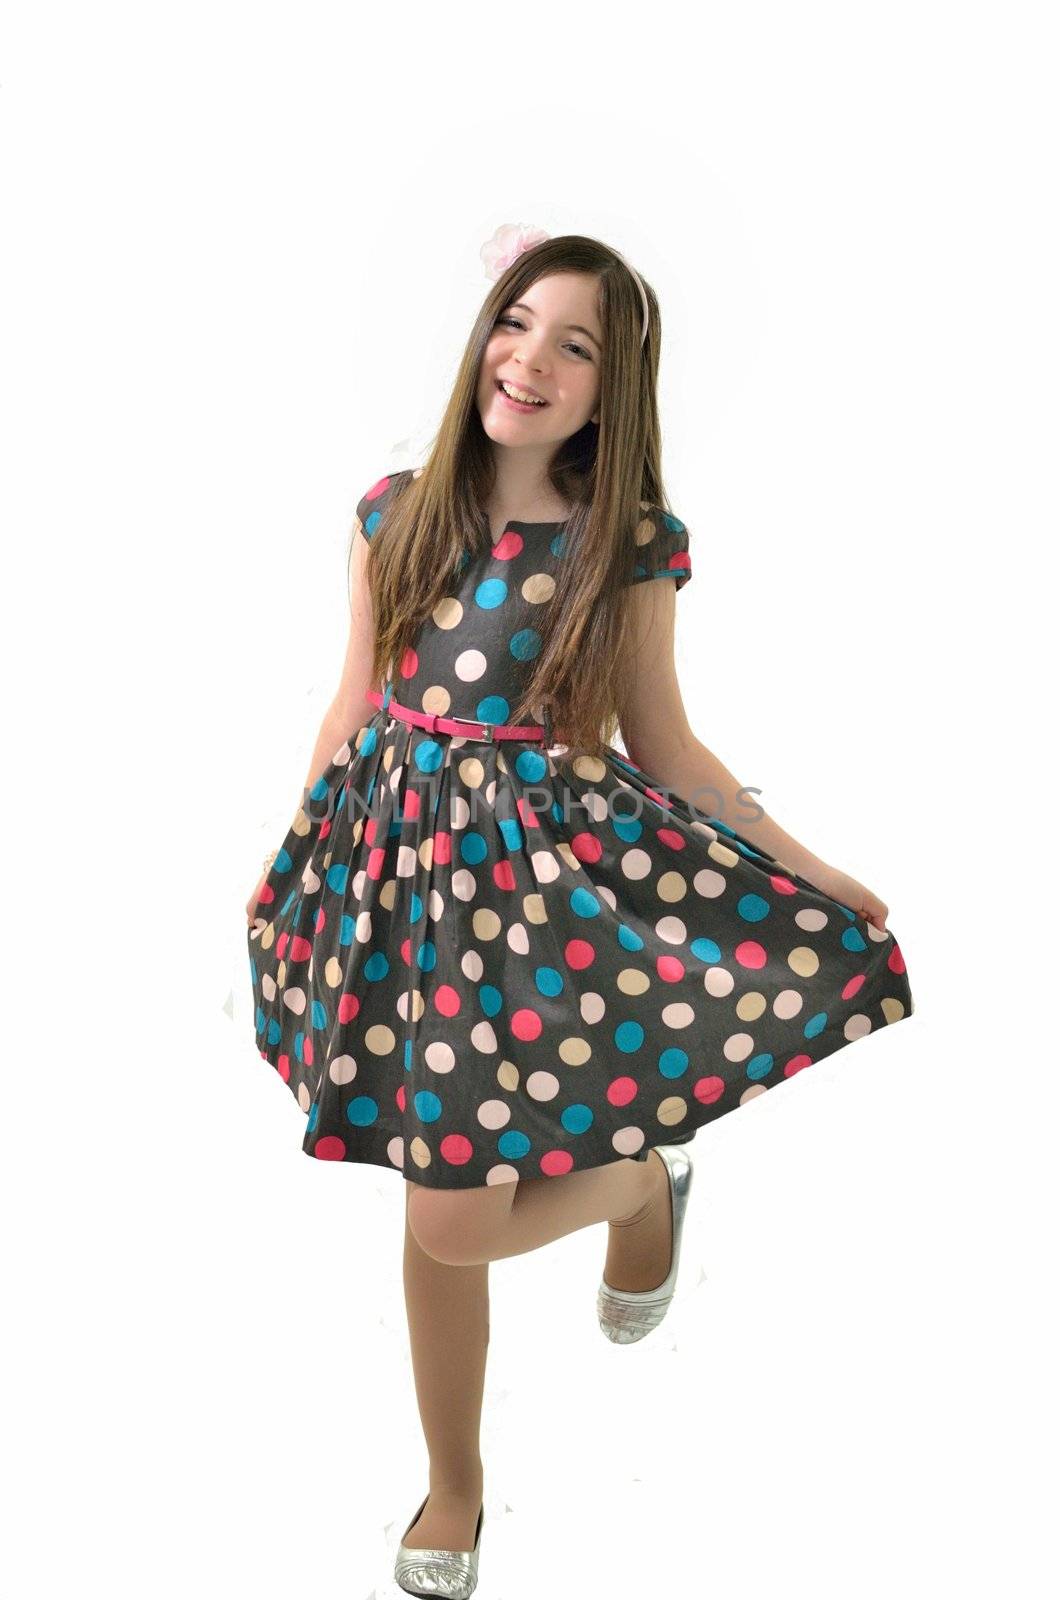 Young girl dancing around in her dress